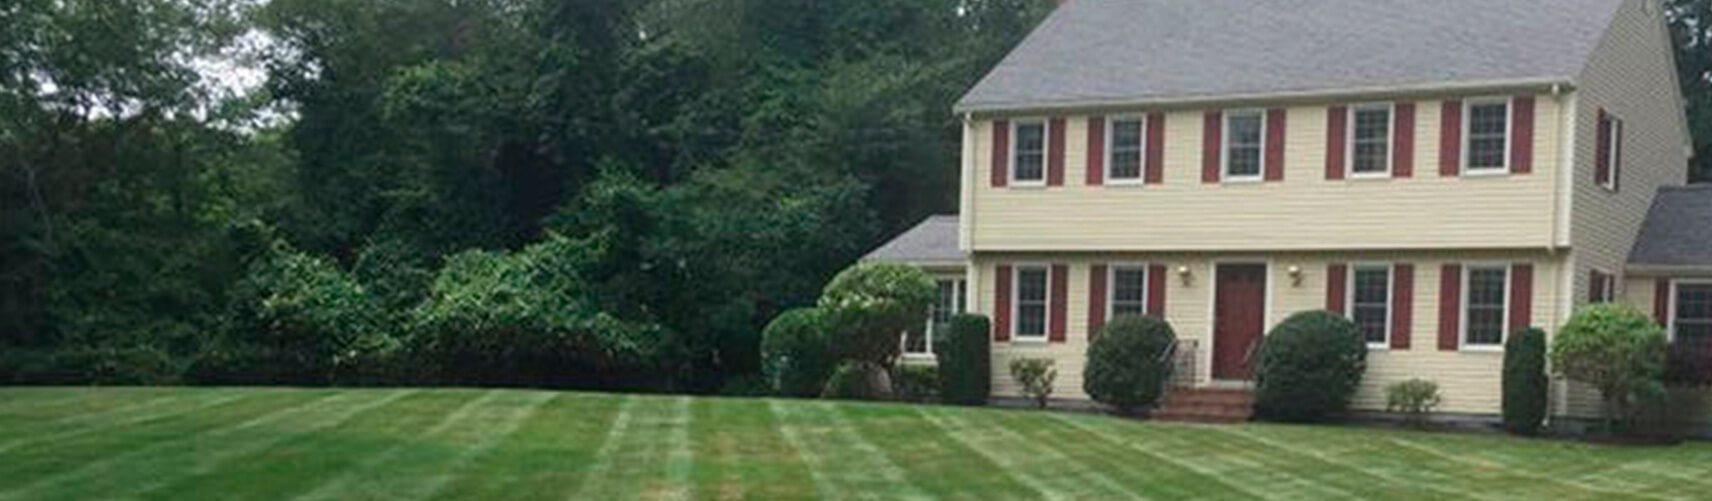 Melrose Commercial Landscaping, Residential Landscaping and Hardscaping